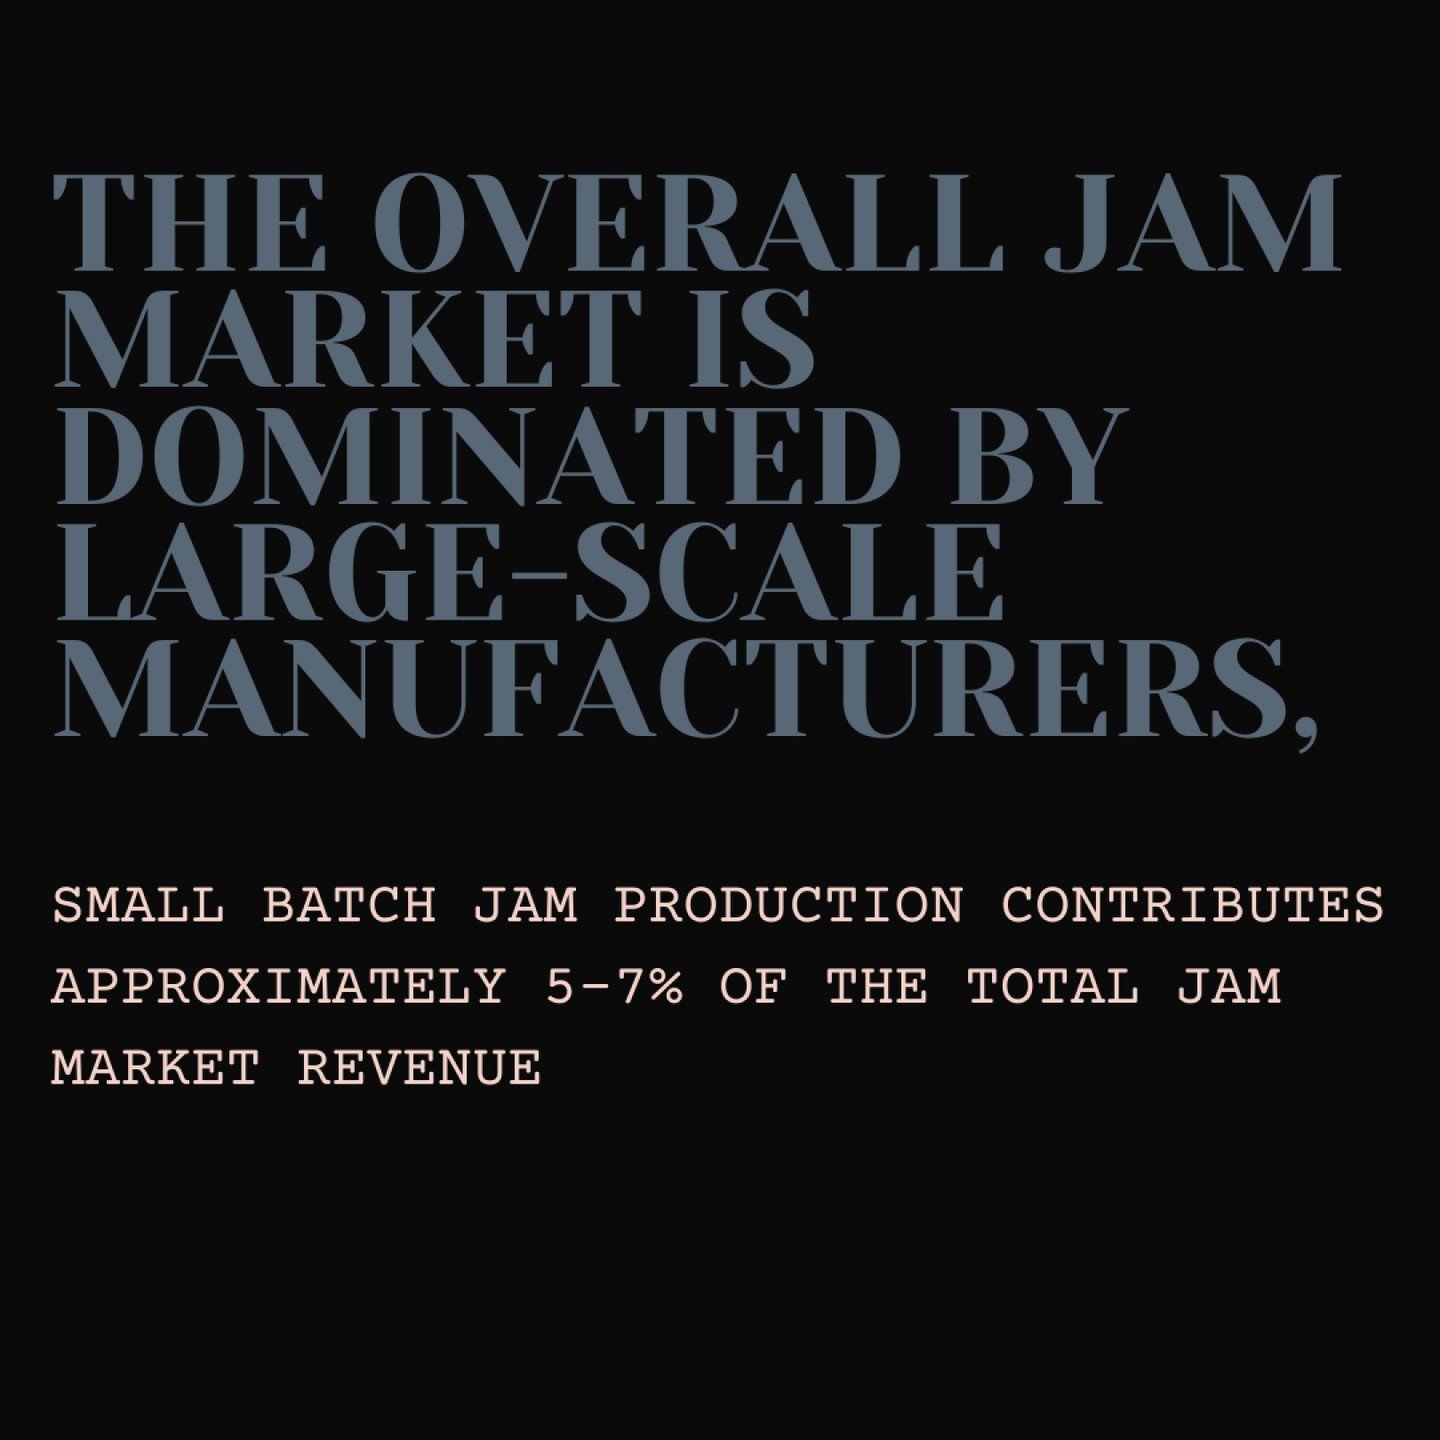 As a small batch jam producer, we craft our products with passion and attention to detail, ensuring outstanding quality and flavor. While we represent a tiny portion of that less than 7% of the market, our size lets us to offer unique benefits. From 